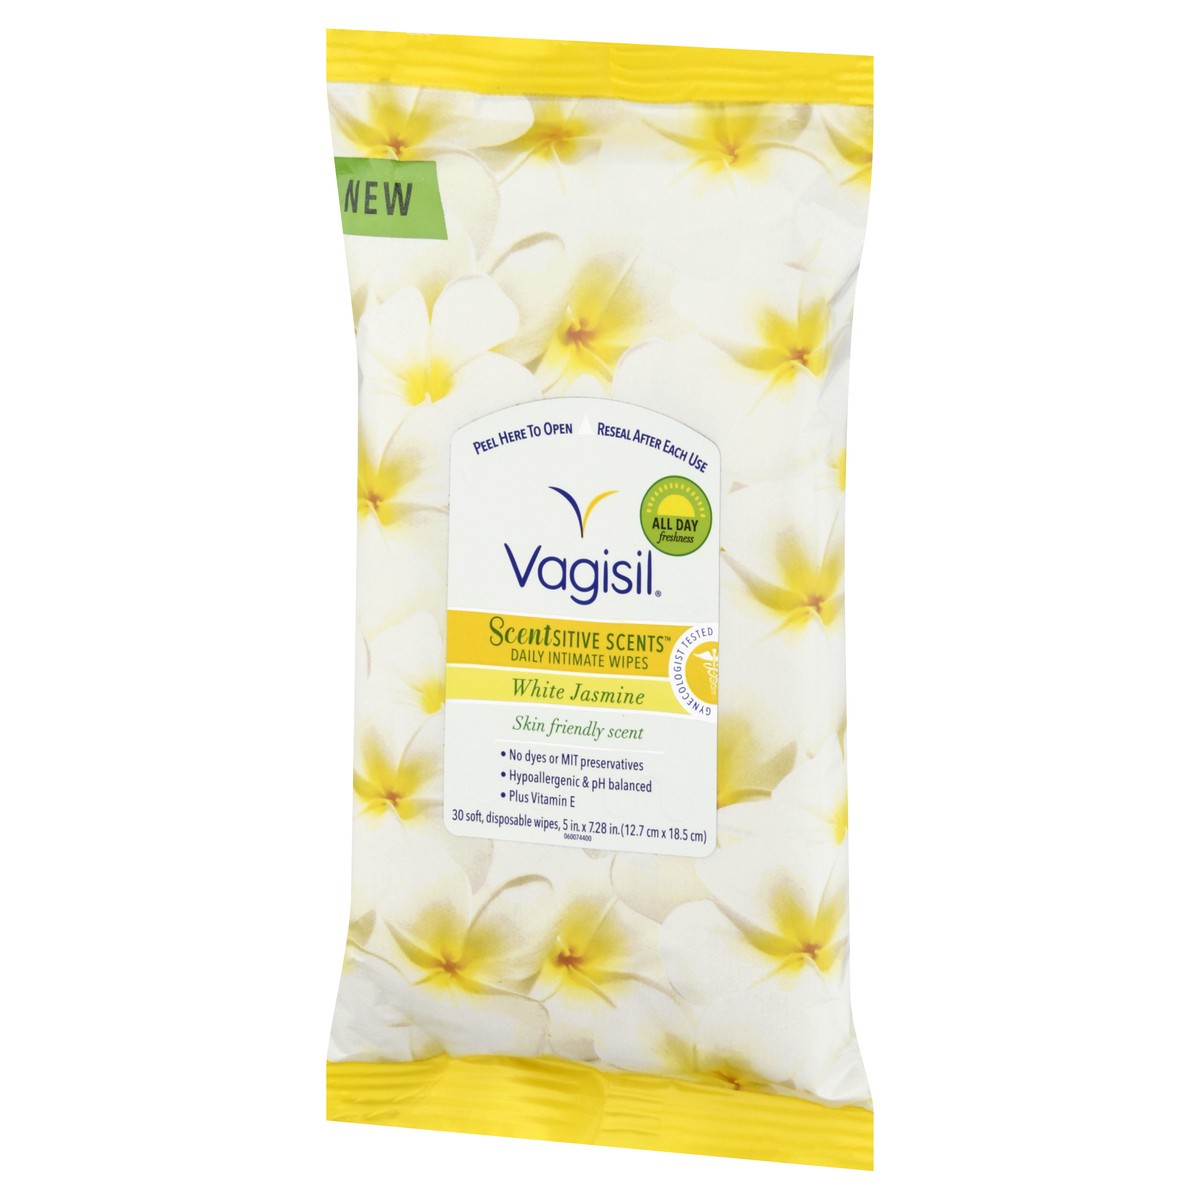 slide 3 of 9, Vagisil Scentsitive Scents Daily Intimate Wipes - White Jasmine, 30 ct